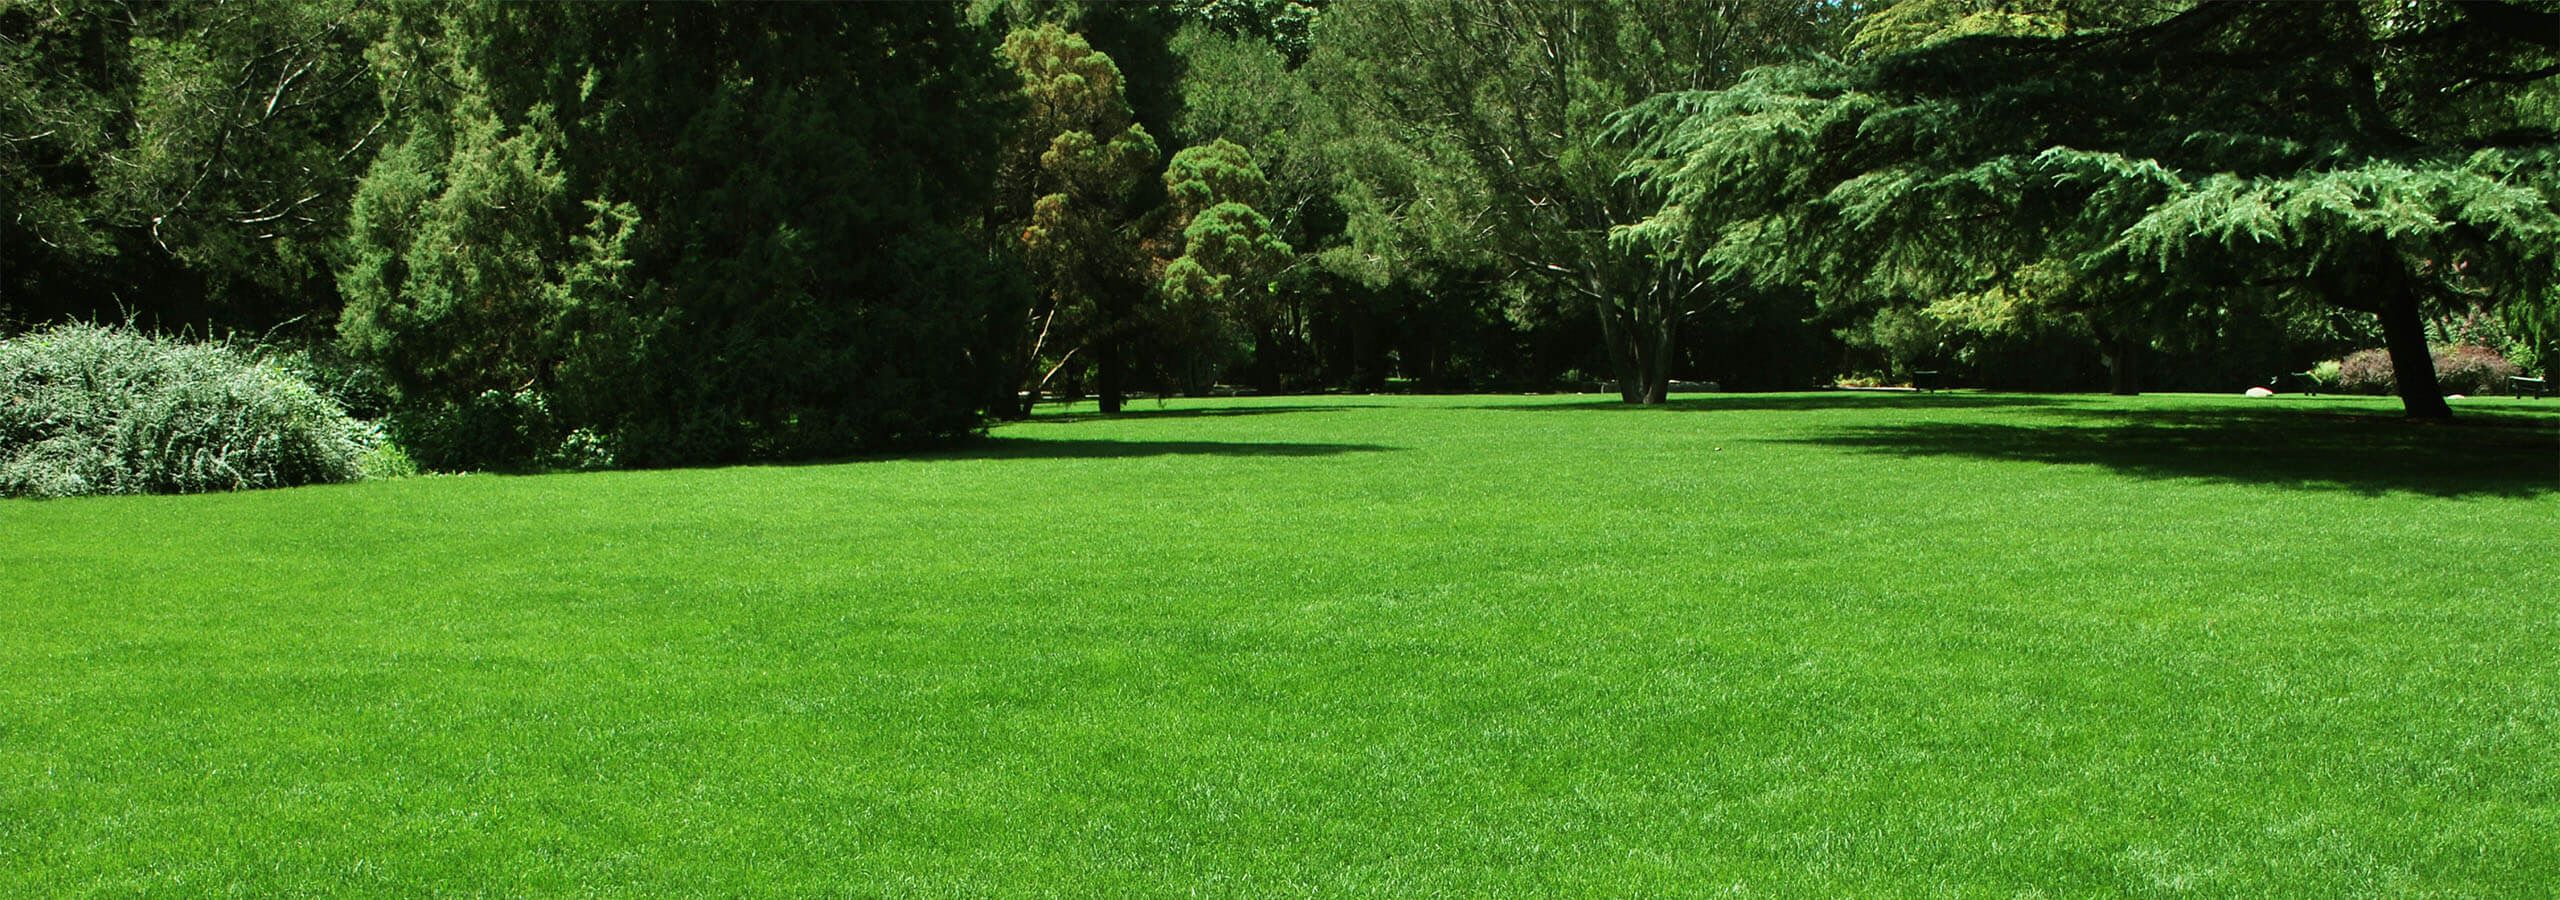 Lawn and garden image turf